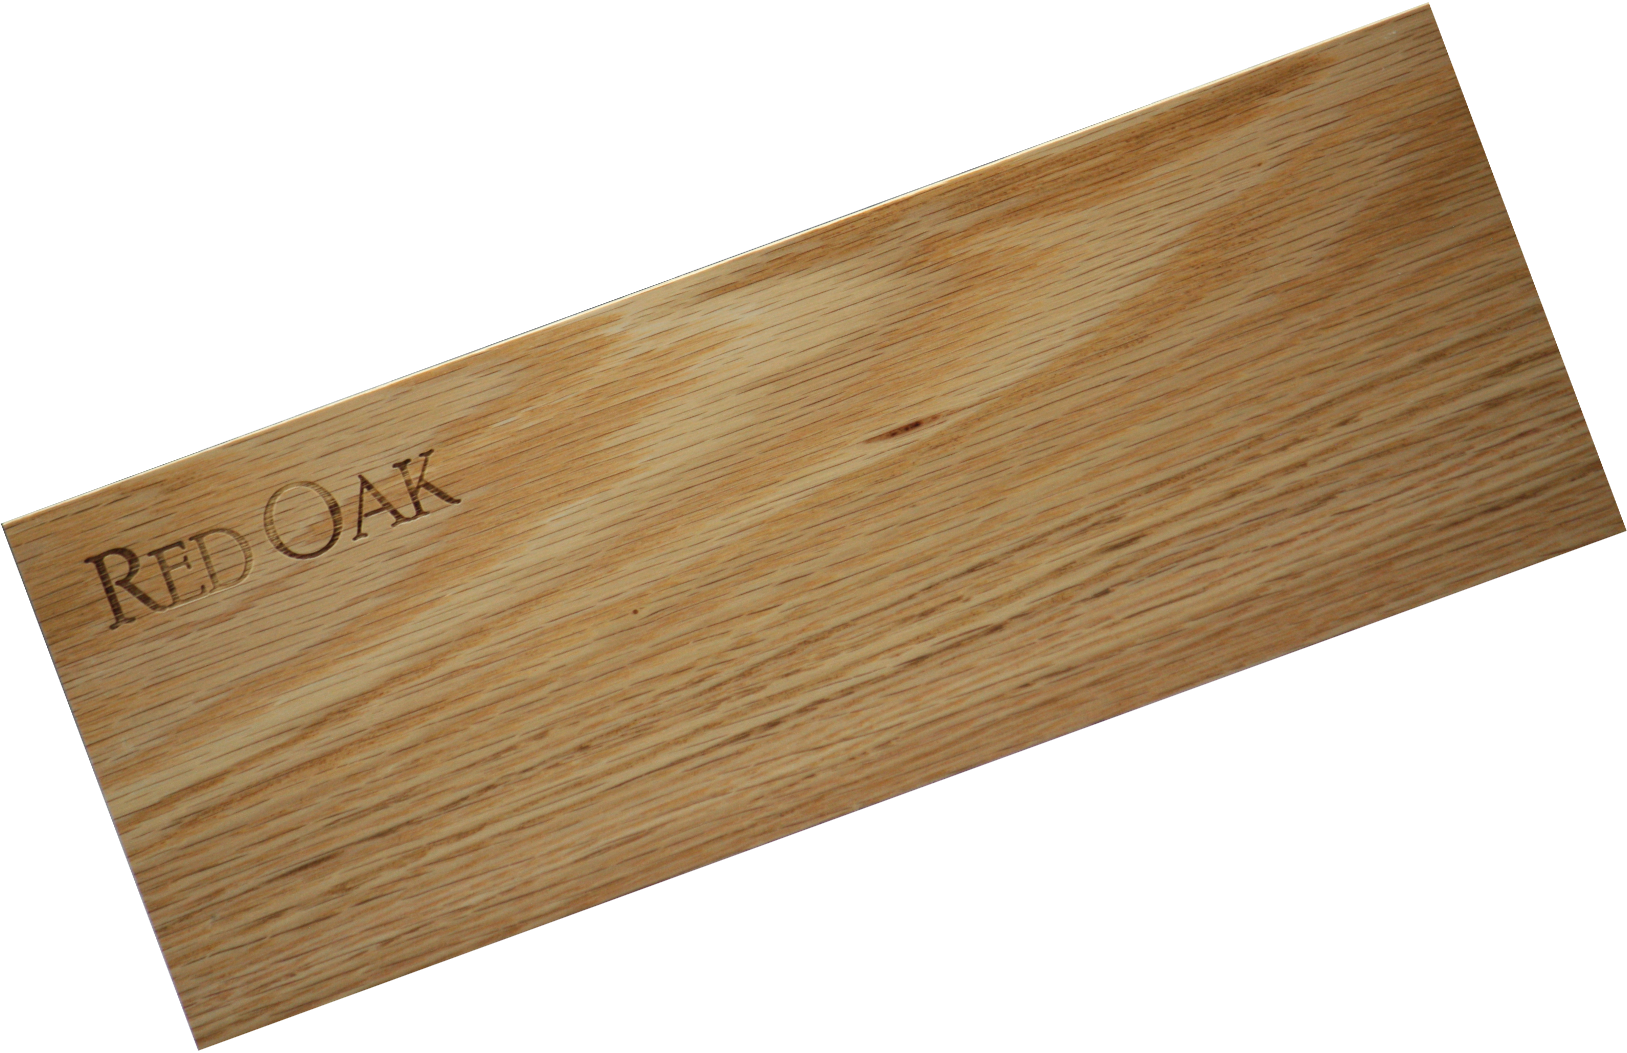 Wood Strip (Red Oak / Hickory) 12" x 24" x  (1/16", 3/32", 1/8", 3/16" or 1/4") - LSTX53-Red Oak-Hickory-O-1/8-F